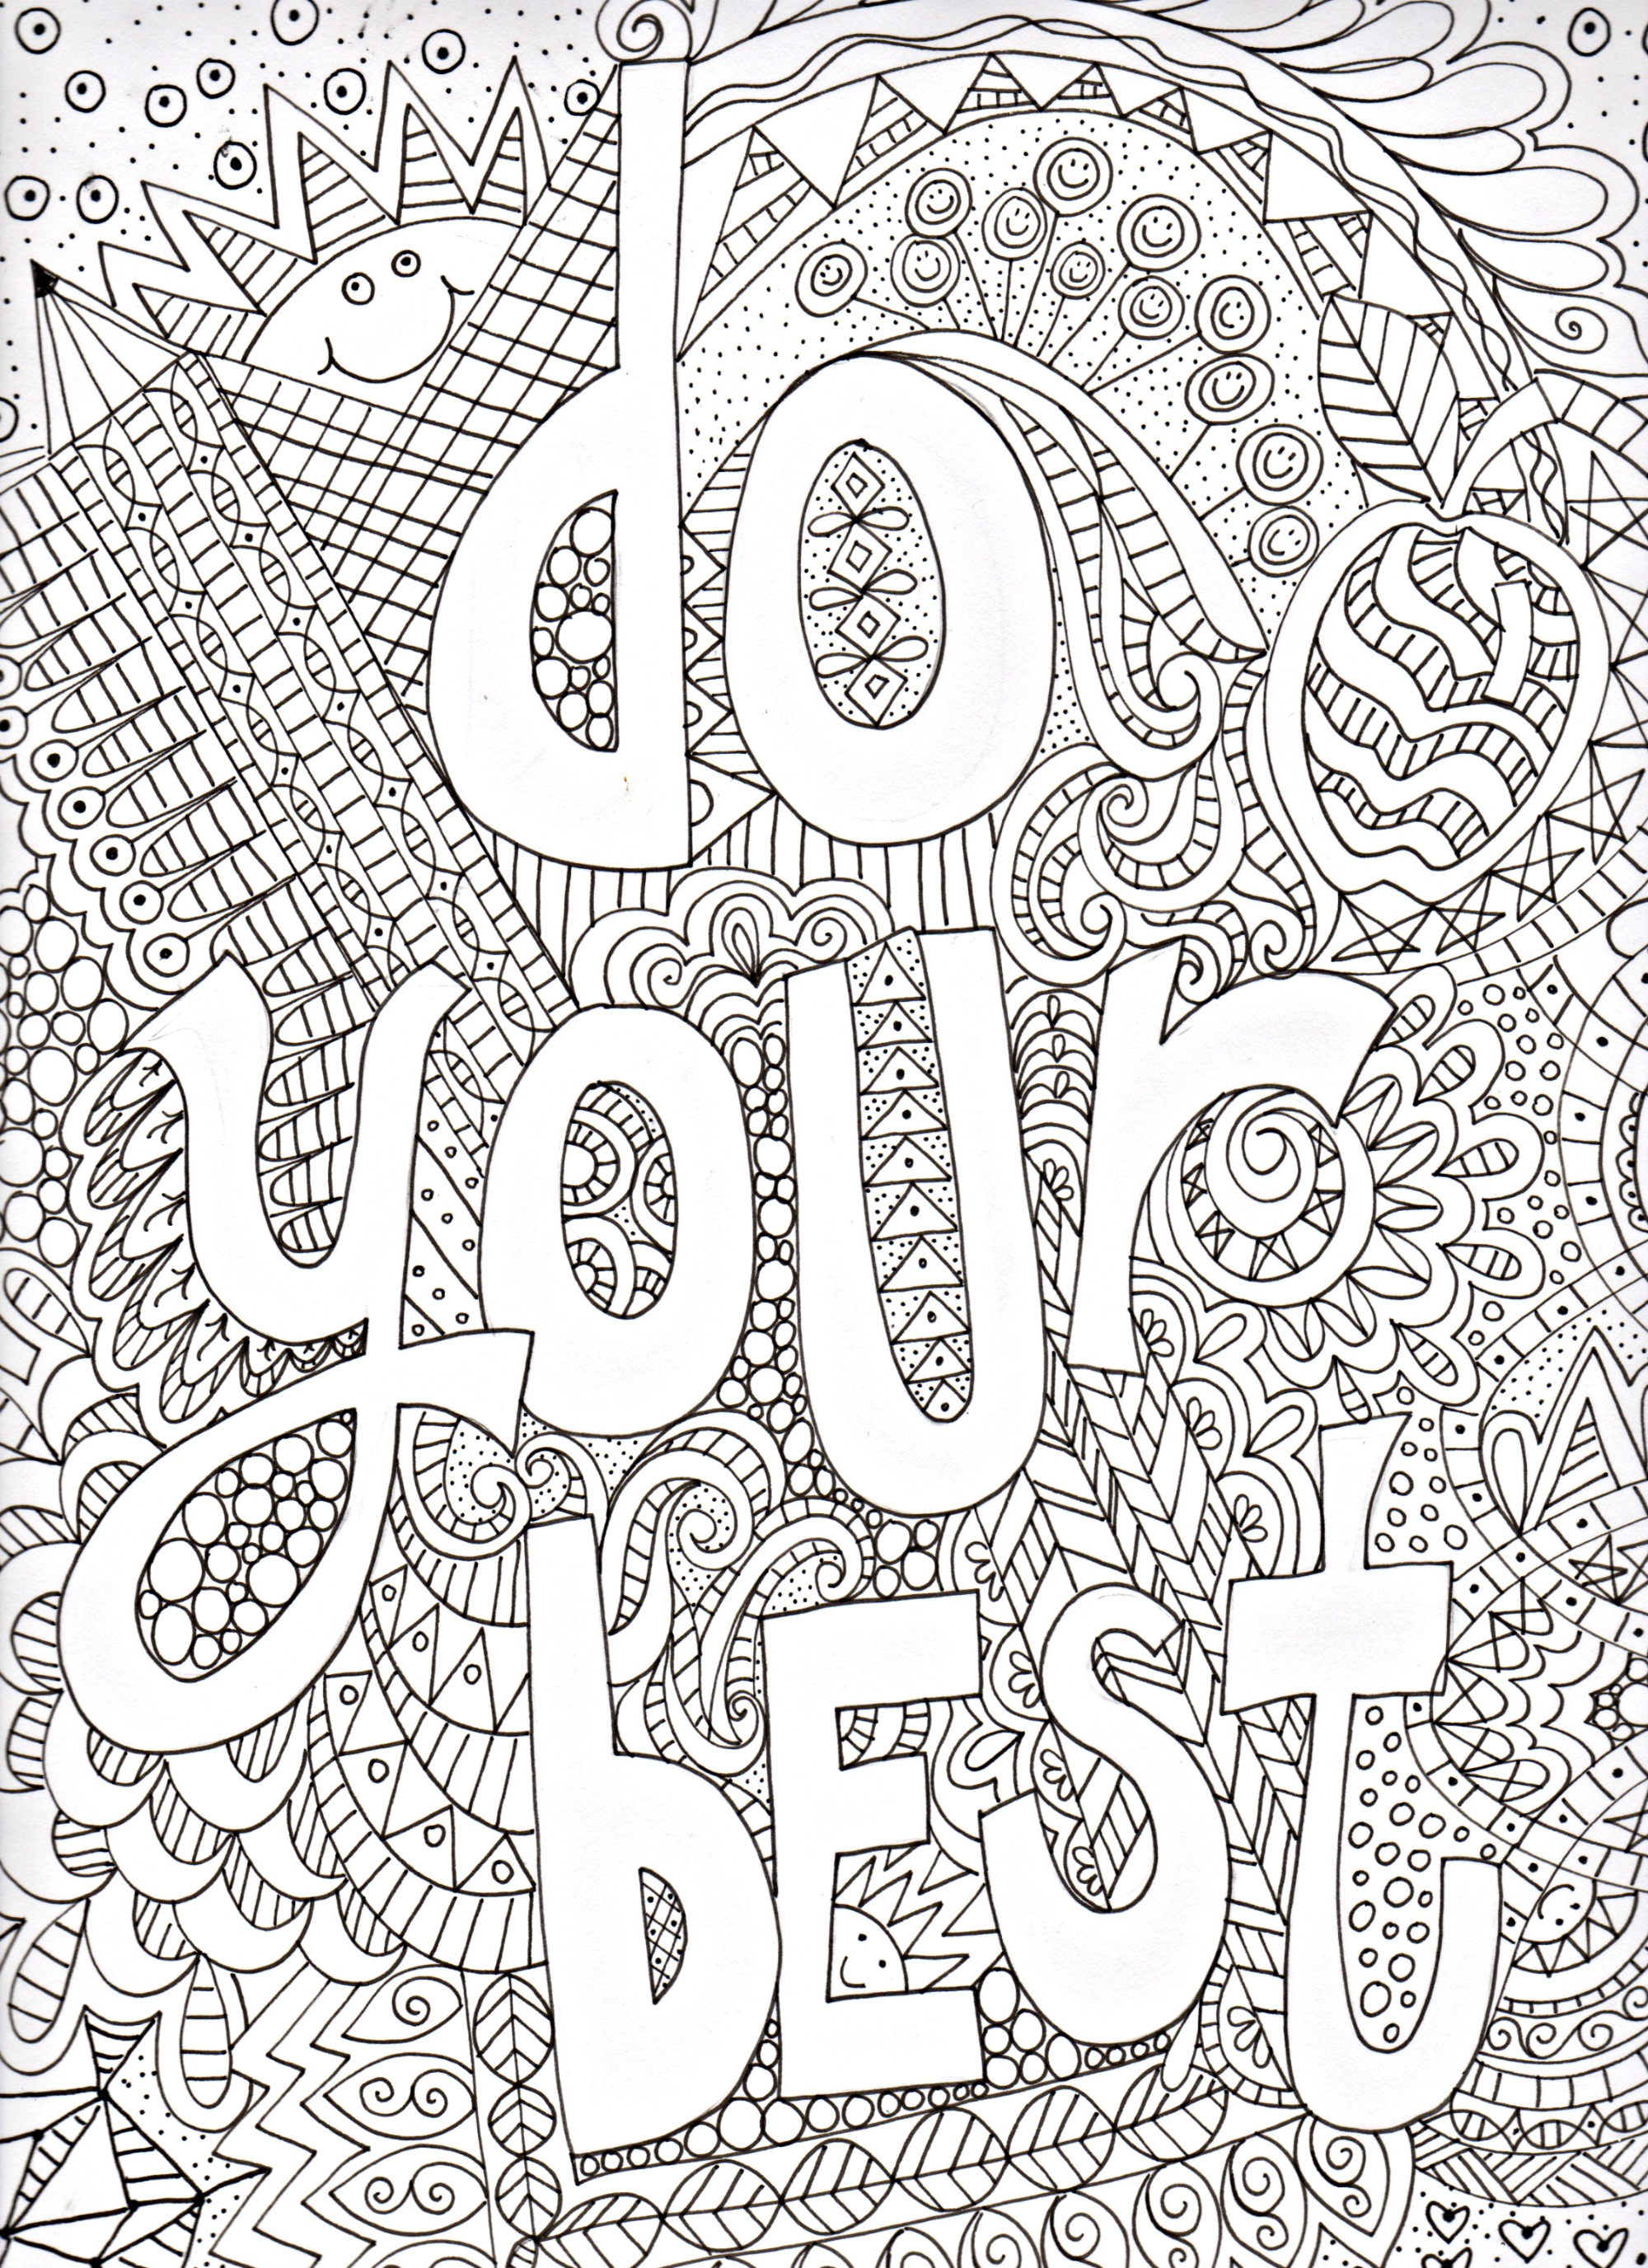 Motivational coloring #17, Download drawings